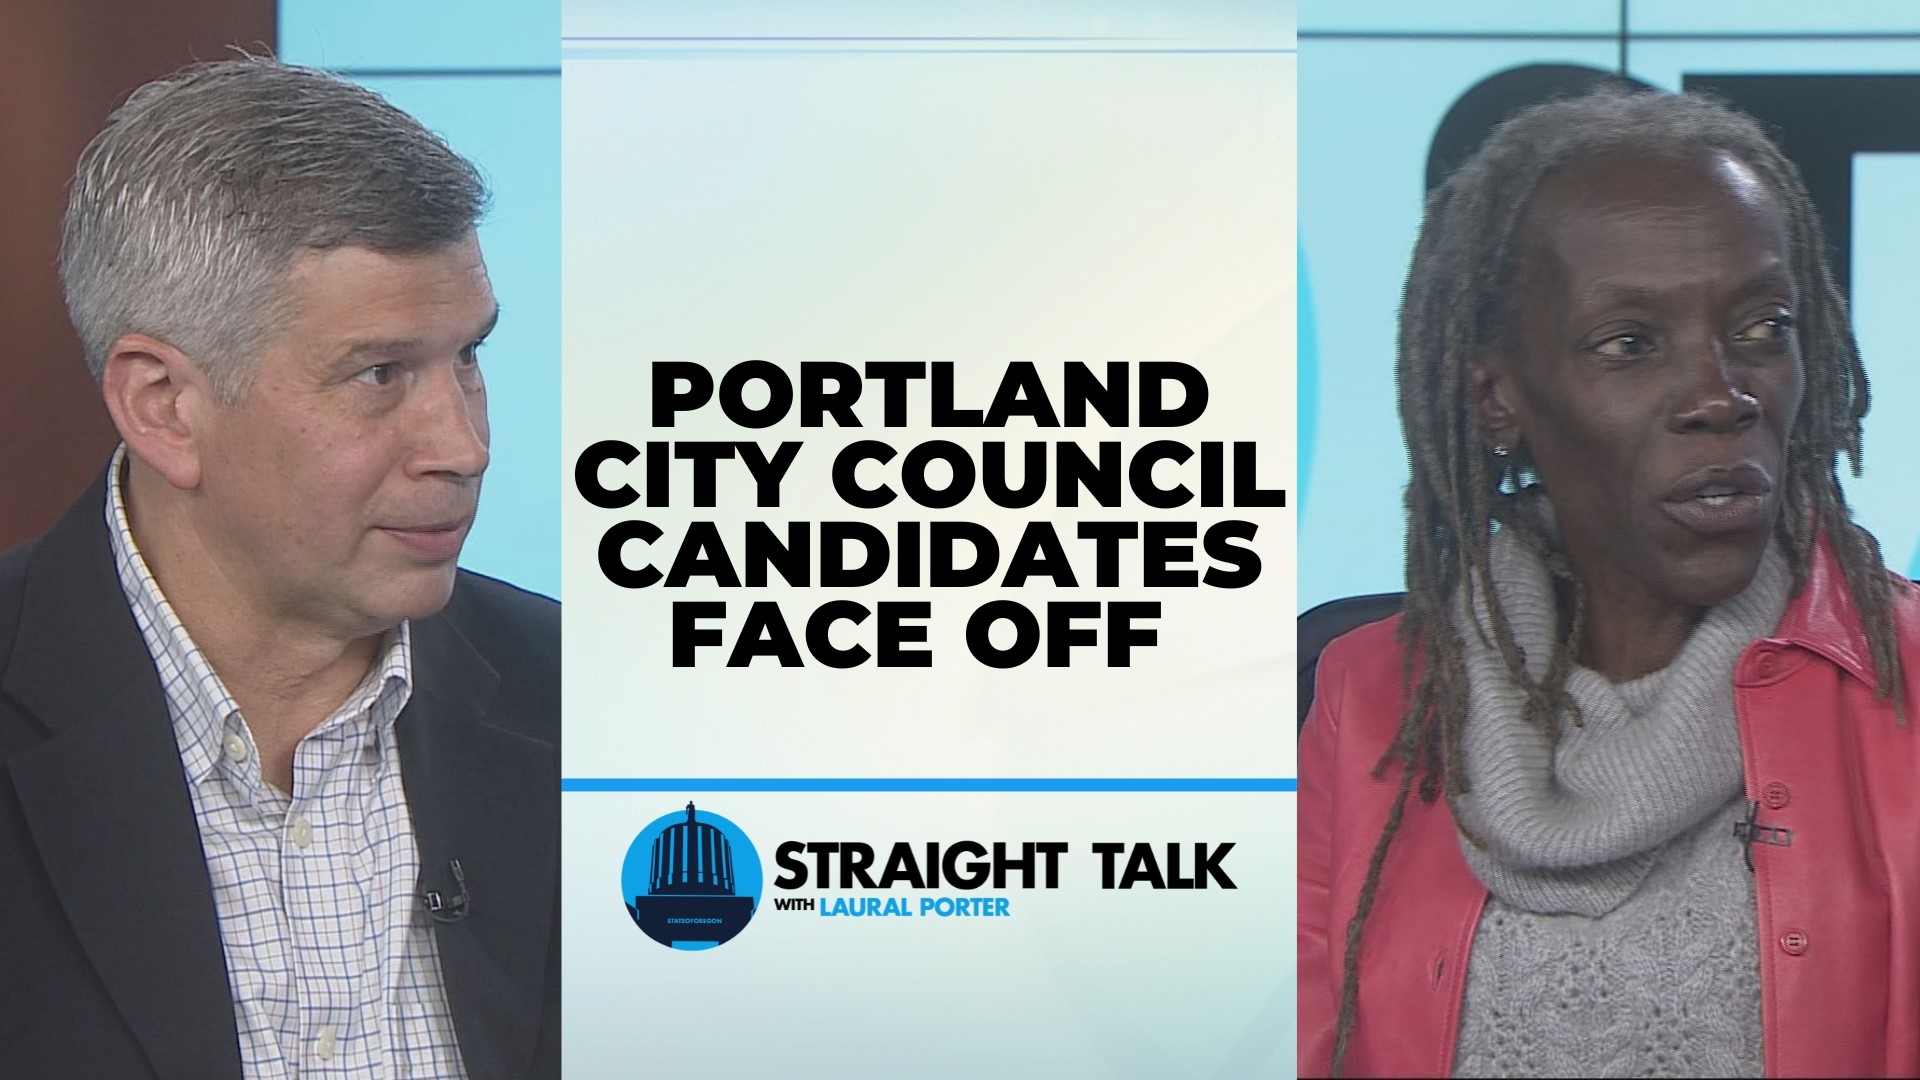 With just days before Election Day, Rene Gonzalez and Jo Ann Hardesty joined Straight Talk this week to talk about their vision for the city if they're elected.